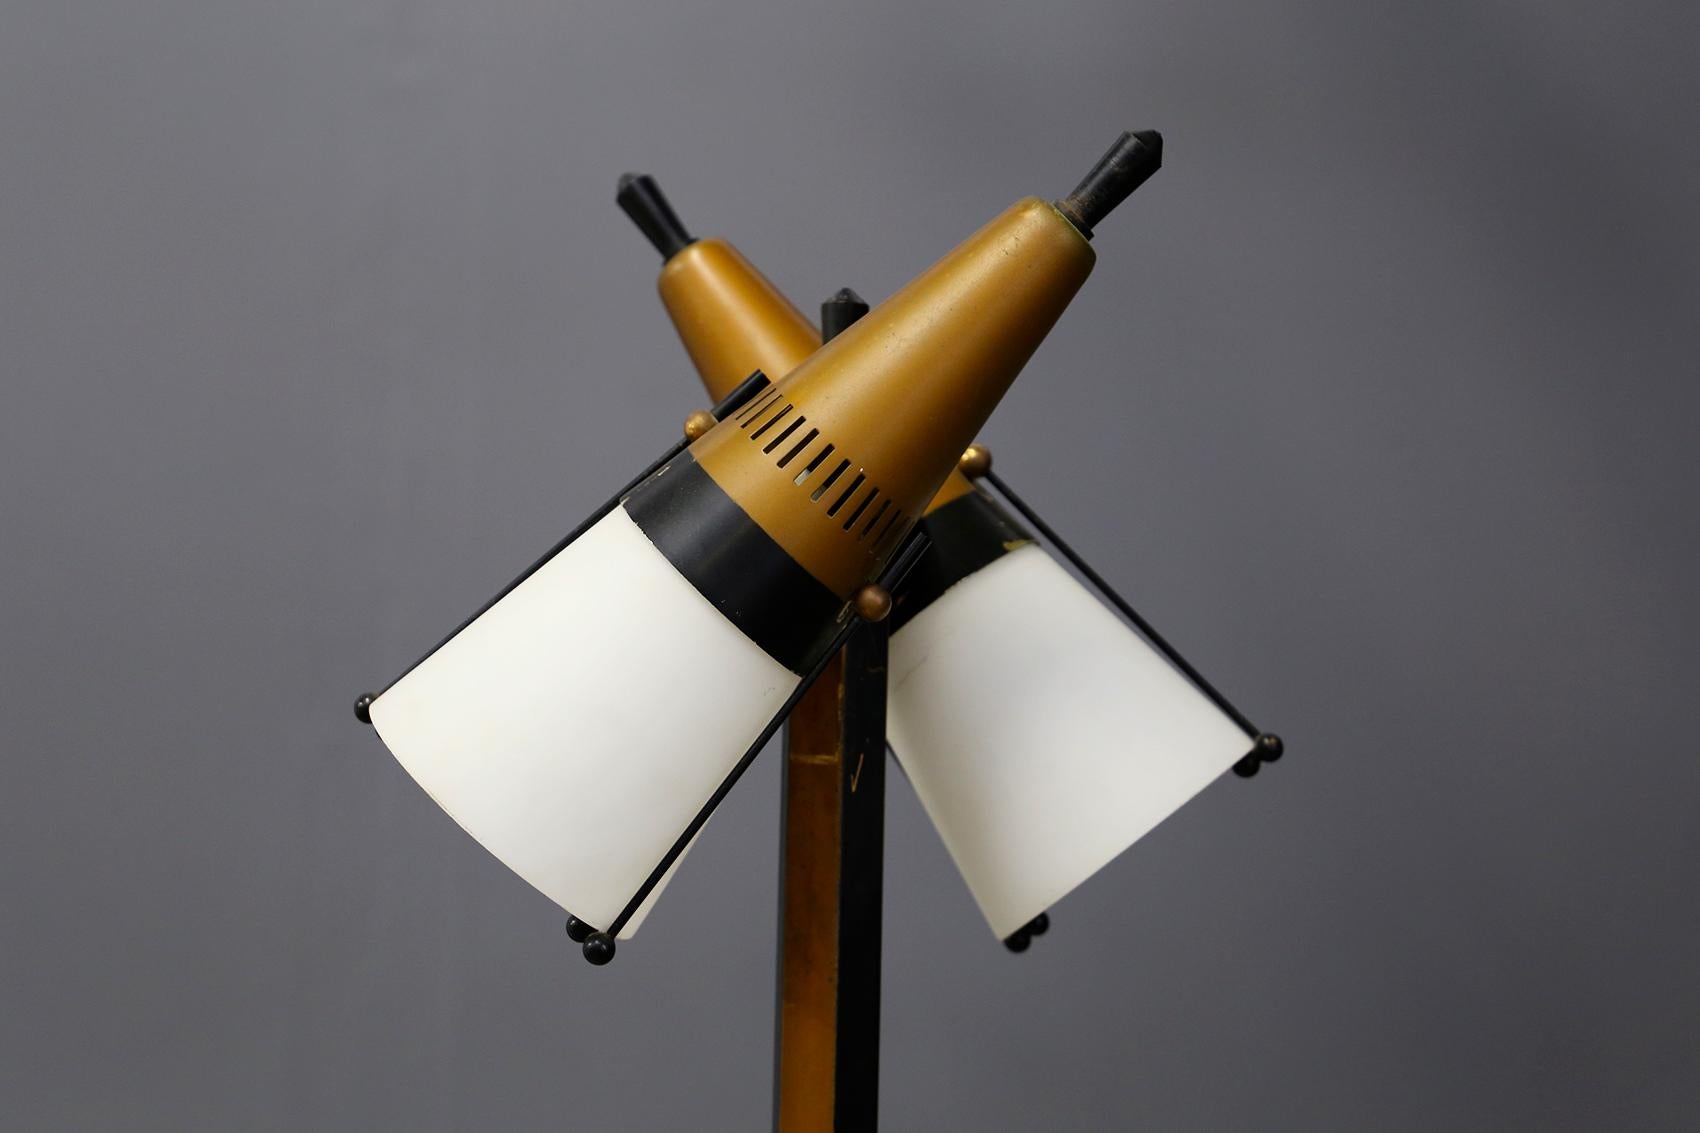 Floor lamp manufactured by Chiarini in 1950. The lamp has a white marble base of circular shape. Above it we notice the brass button for its ignition. The stem is made of brass and aluminium painted black. The peculiarity of the lamp is its light